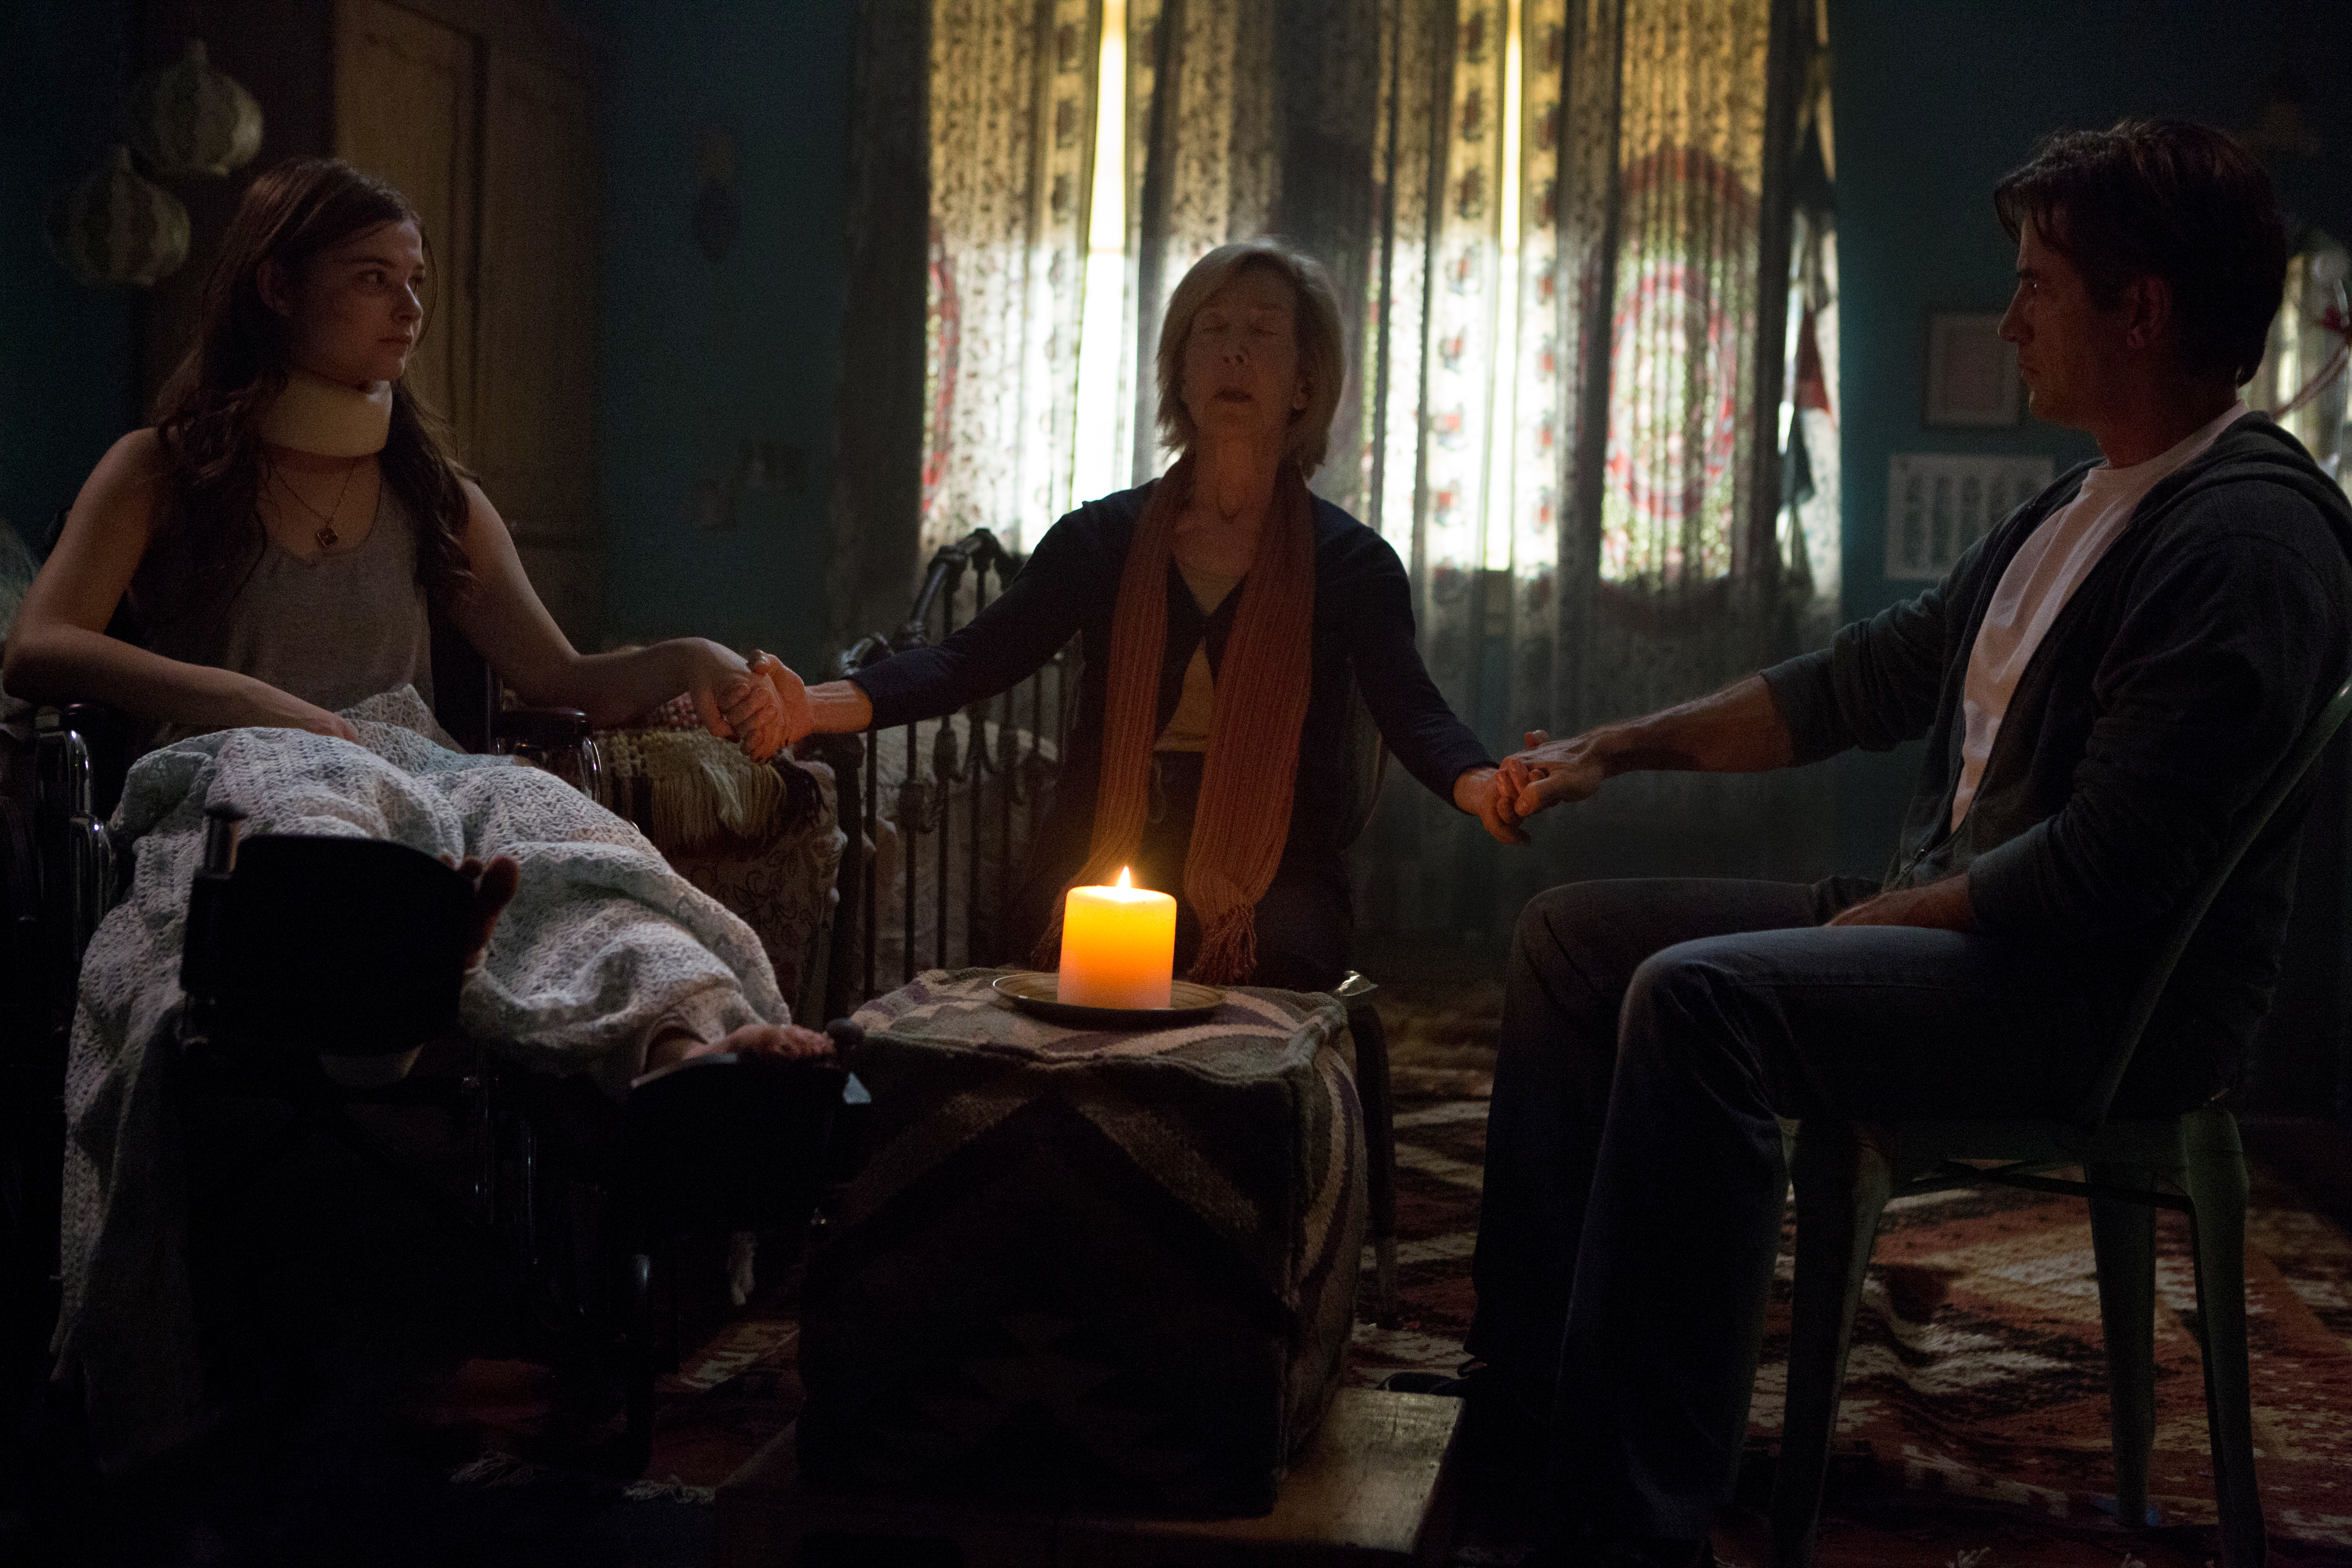 Insidious Chapter 3 (image source: Focus Features)